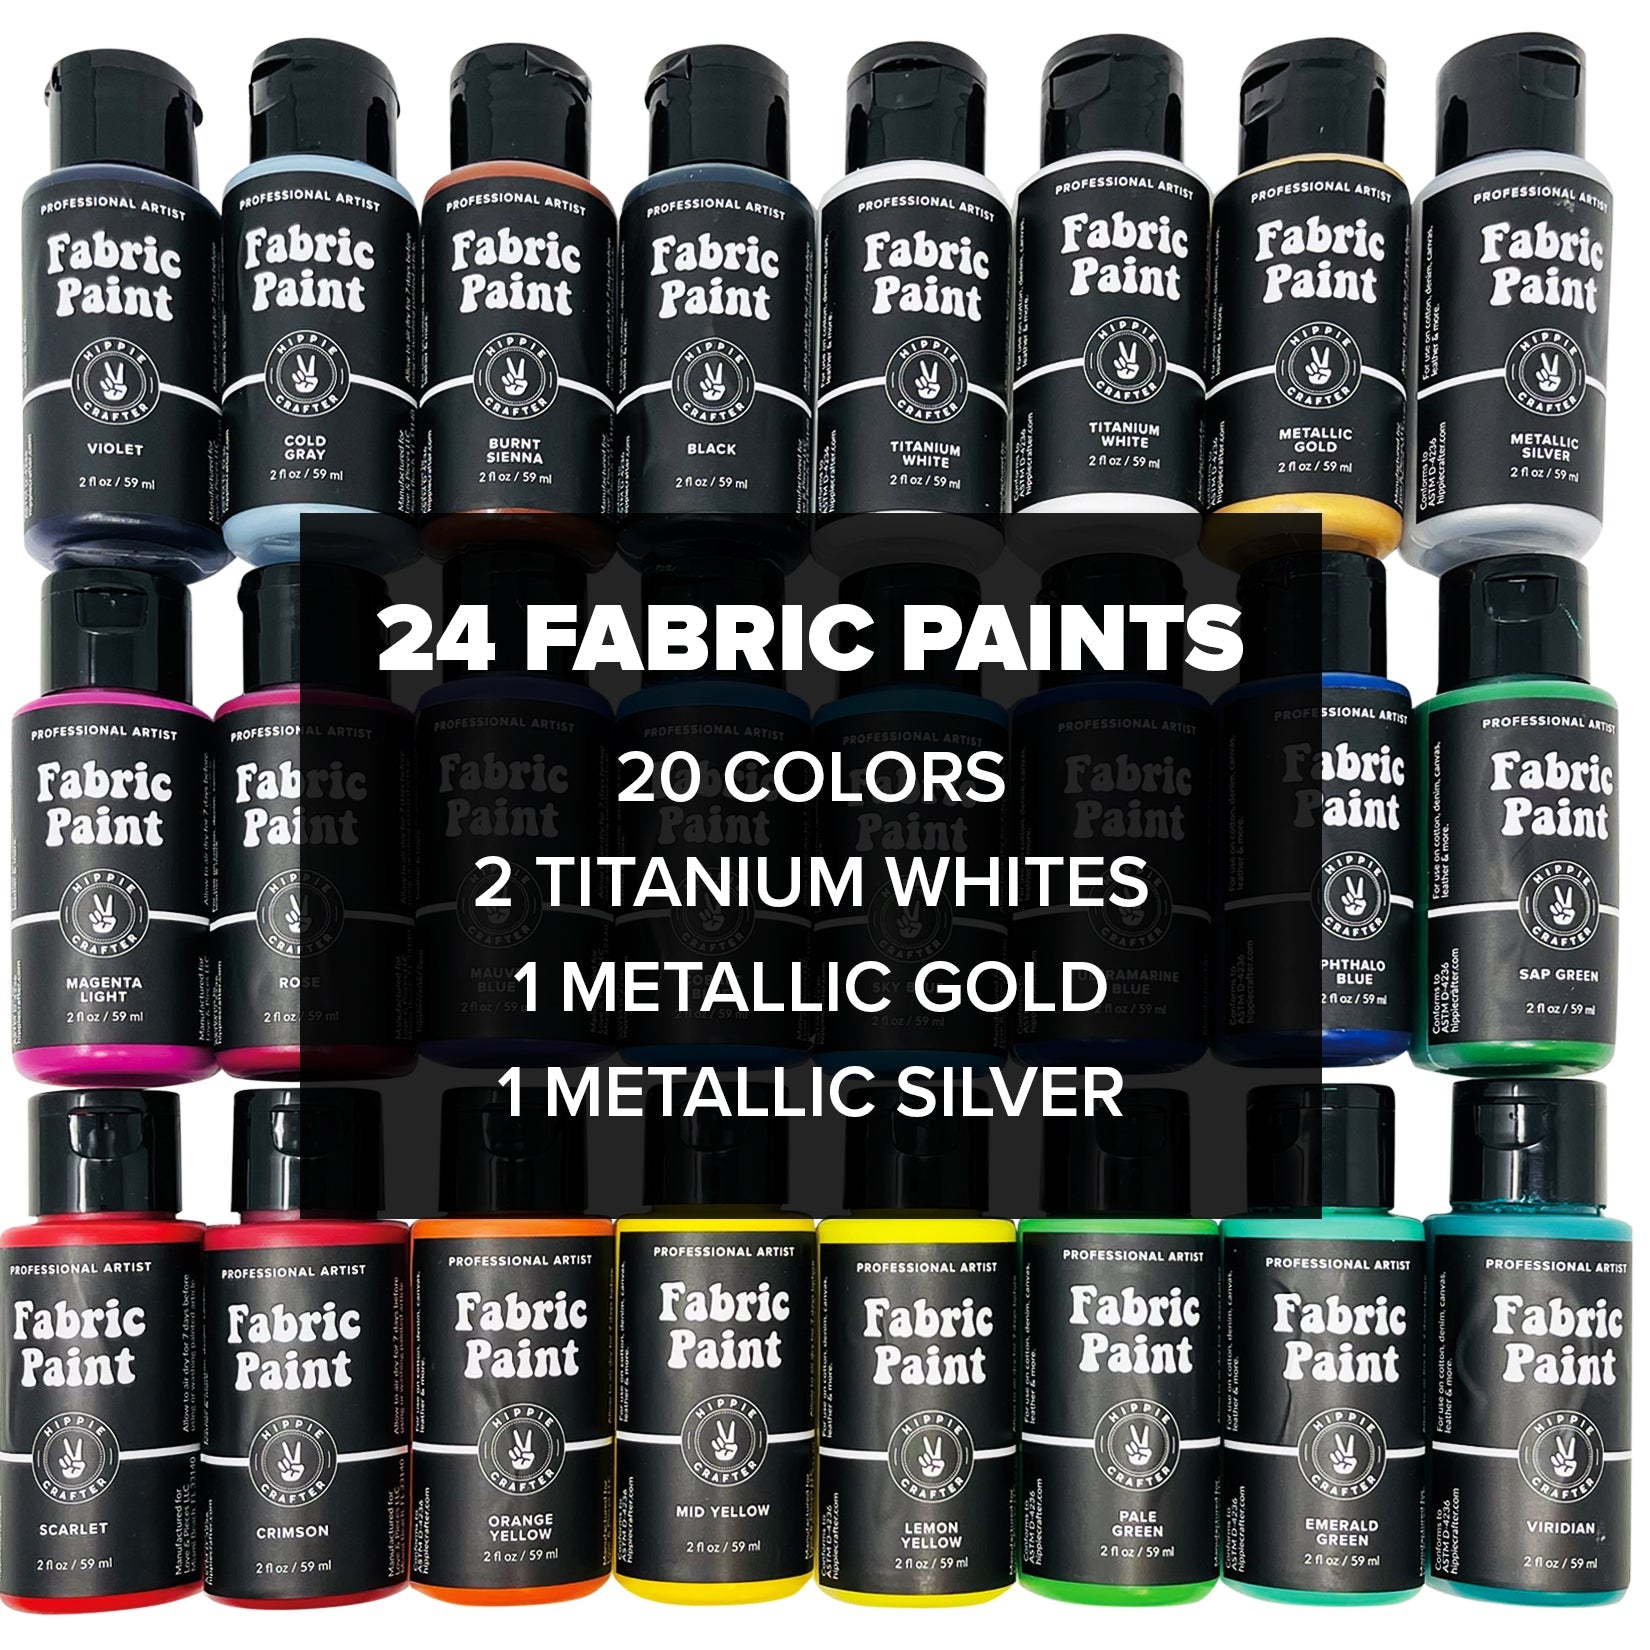 12 24 Colors Fabric Paint Set for Clothes with 6 Brushes, 1